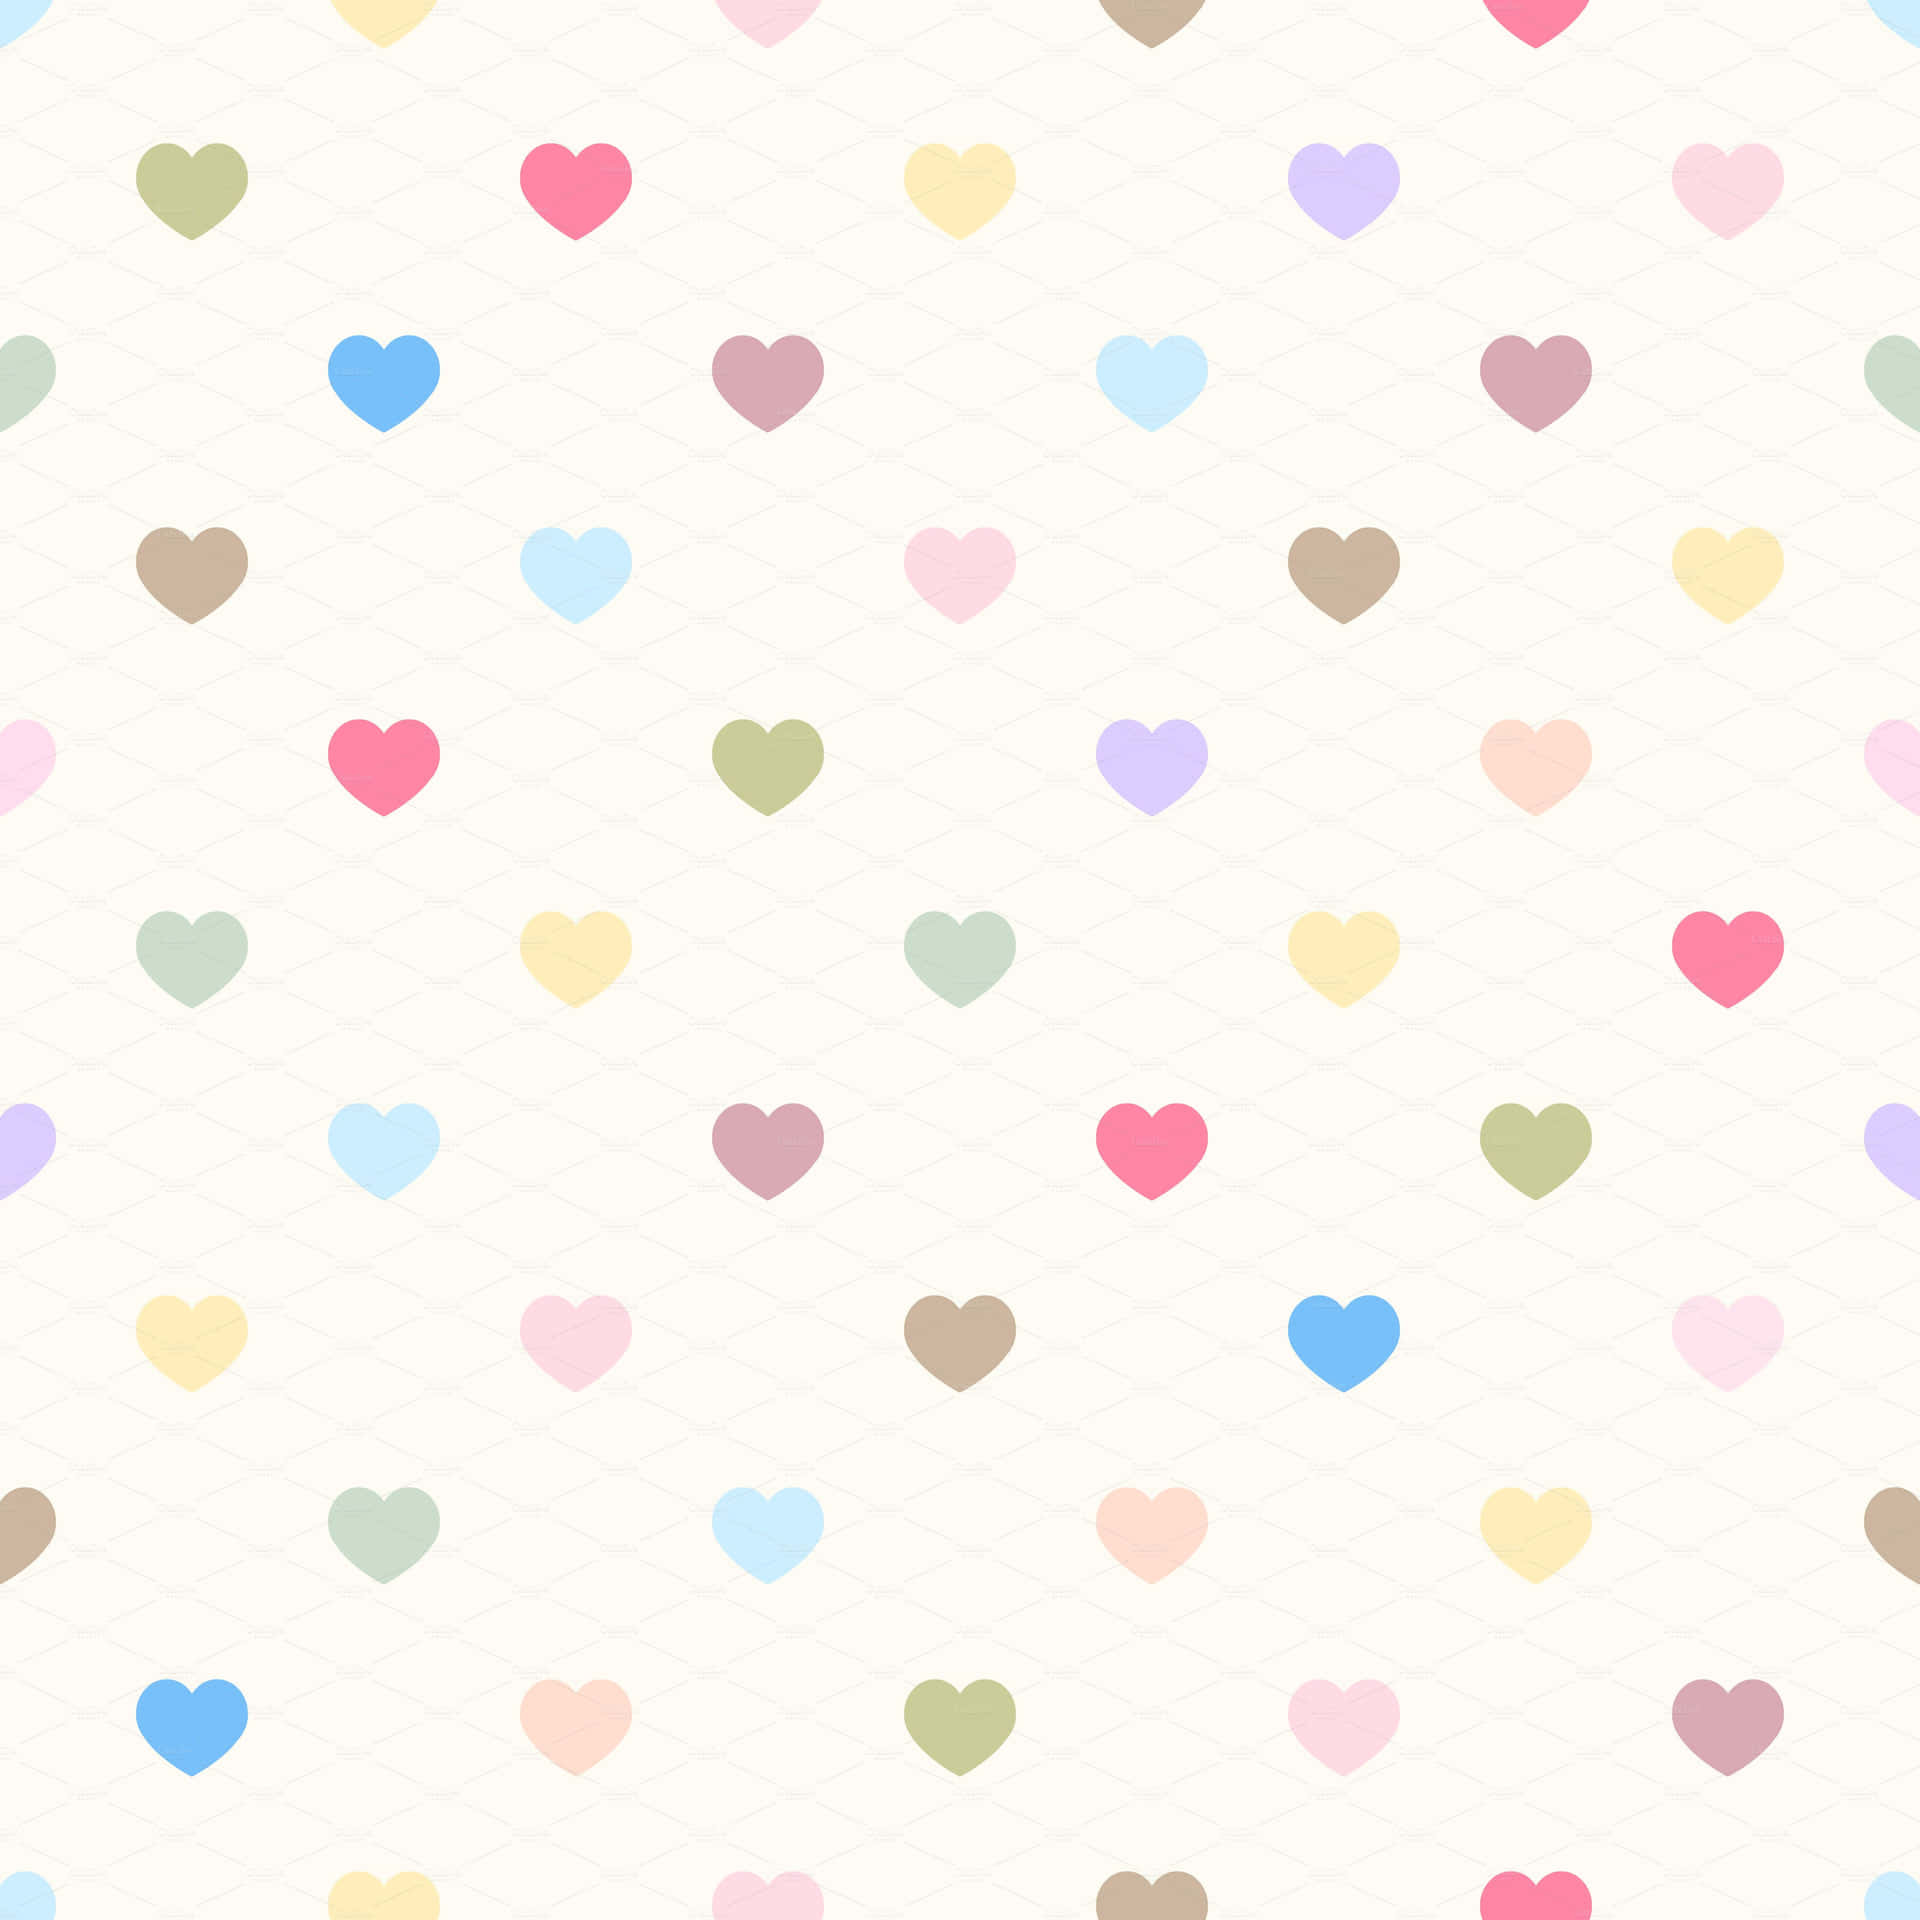 Adorable Heart-filled Background